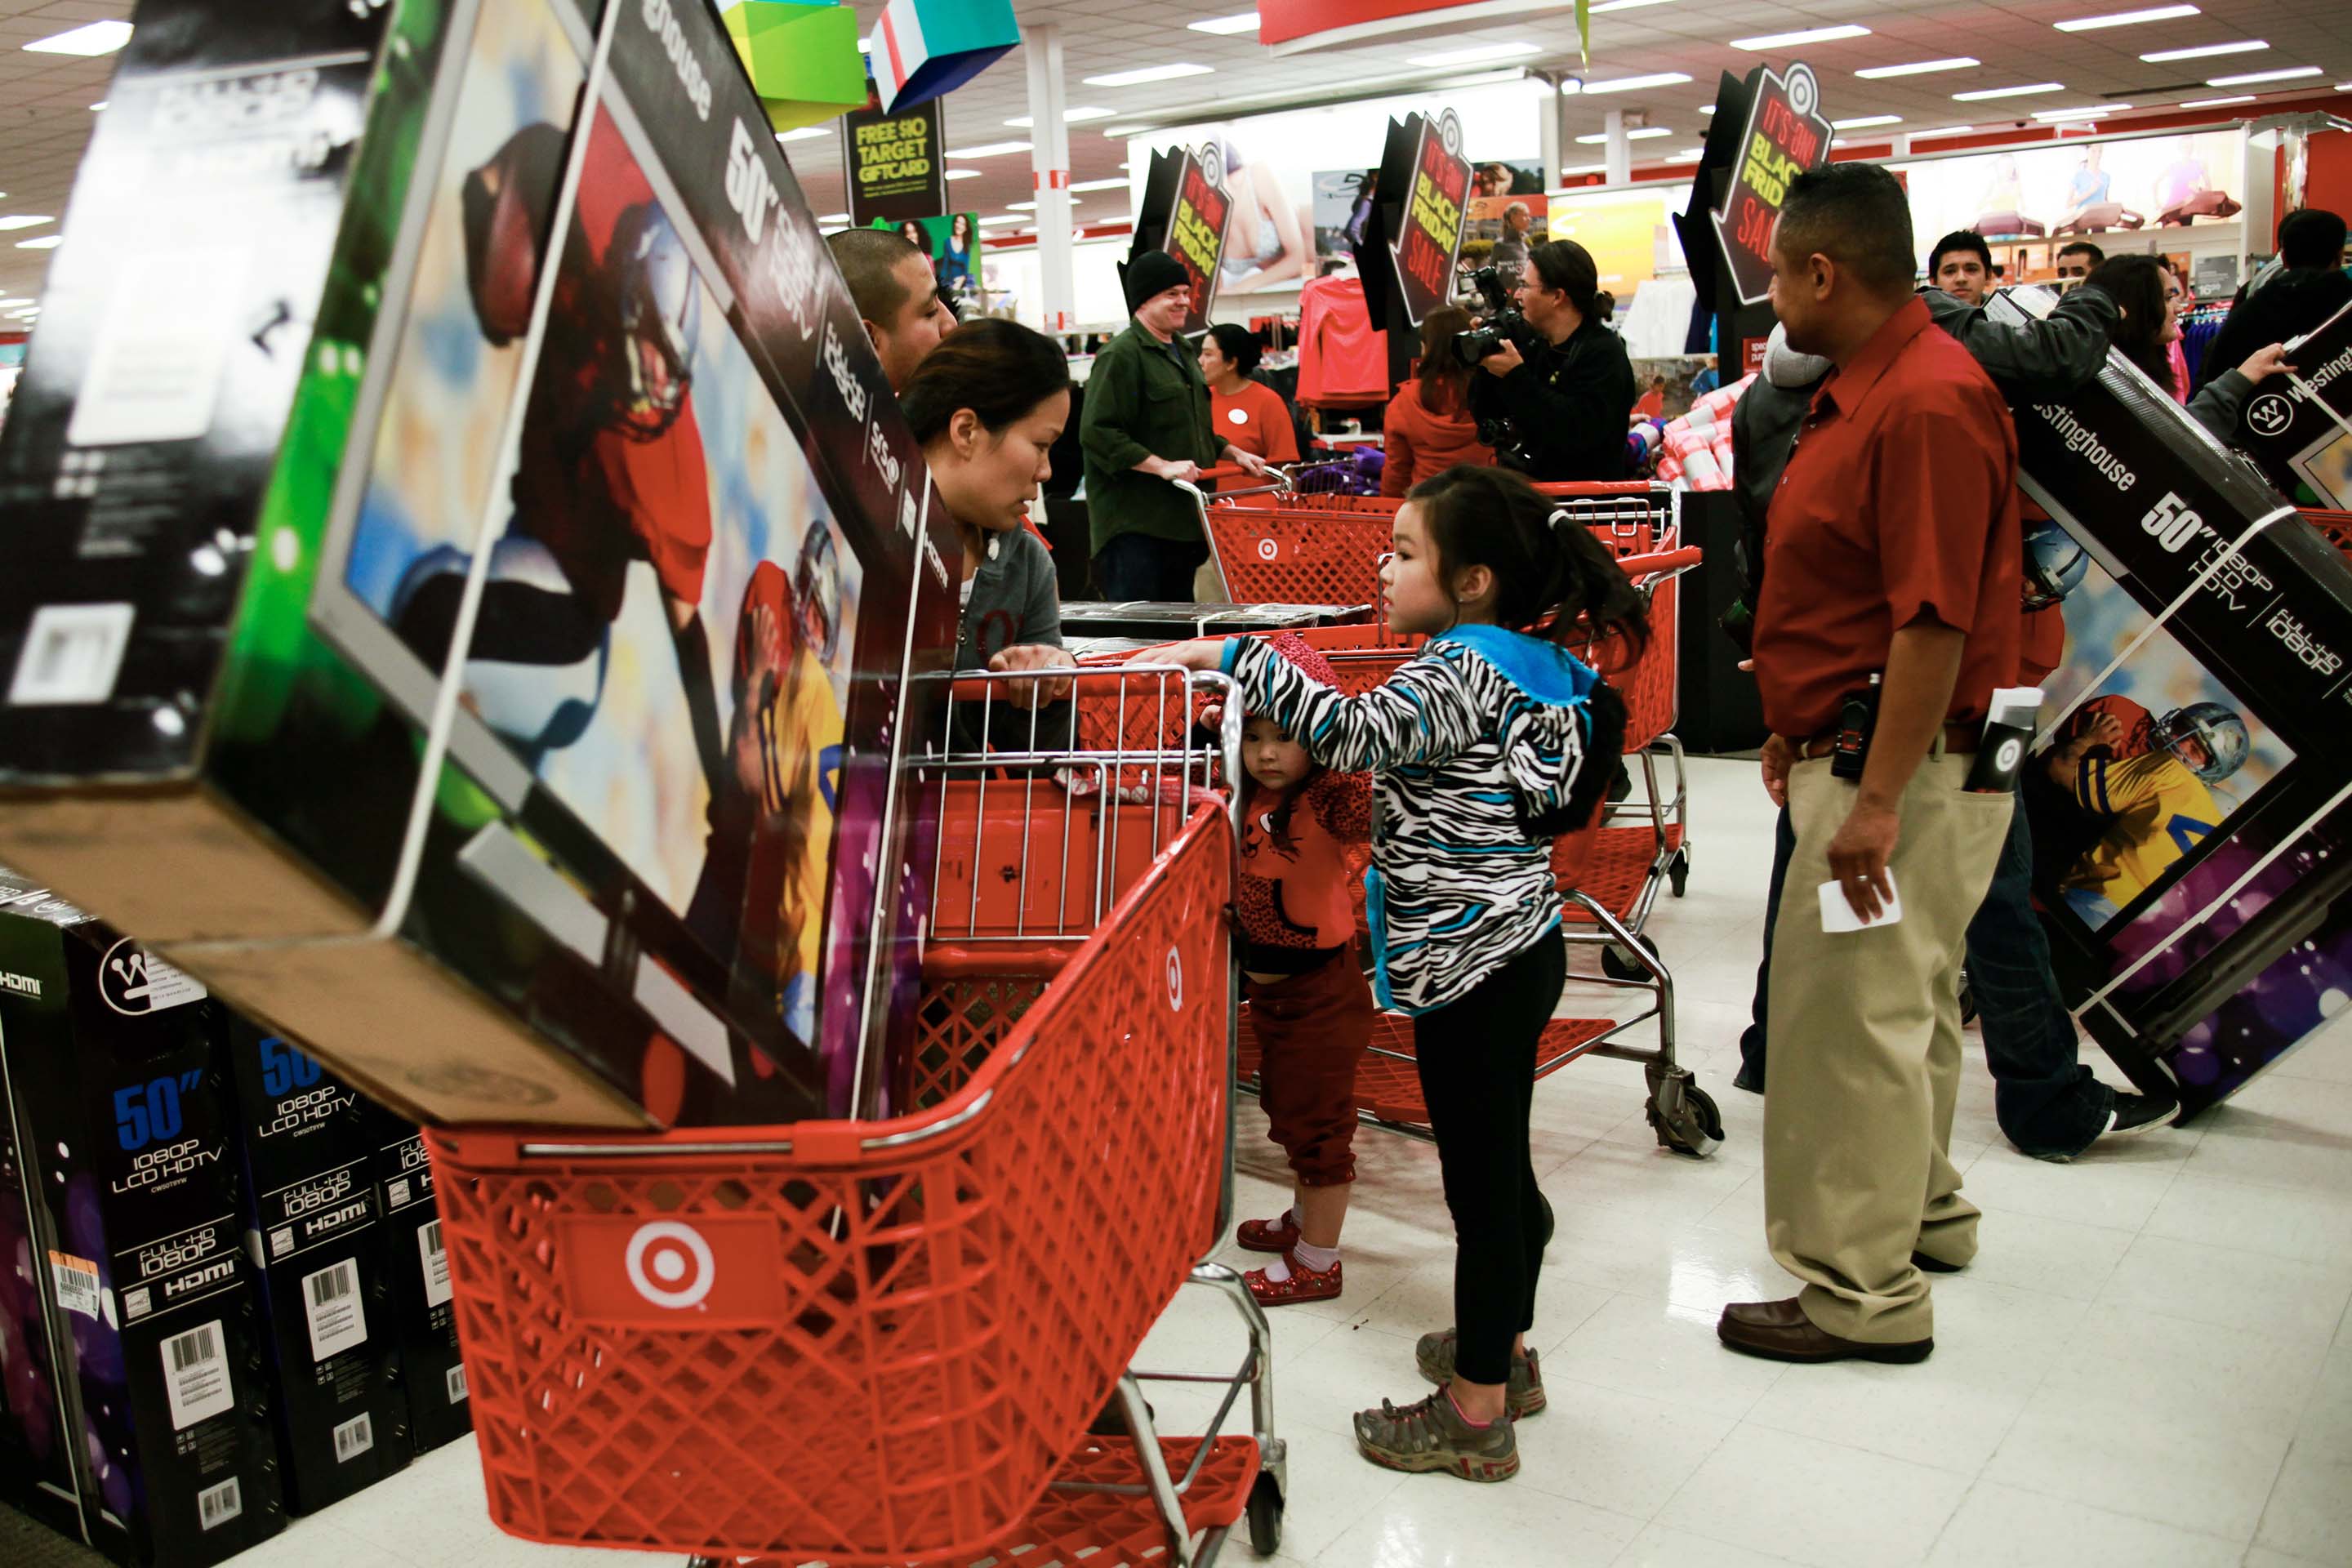 Retailers Like Walmart and Macy's Are Hiring Fewer Holiday Workers This Year